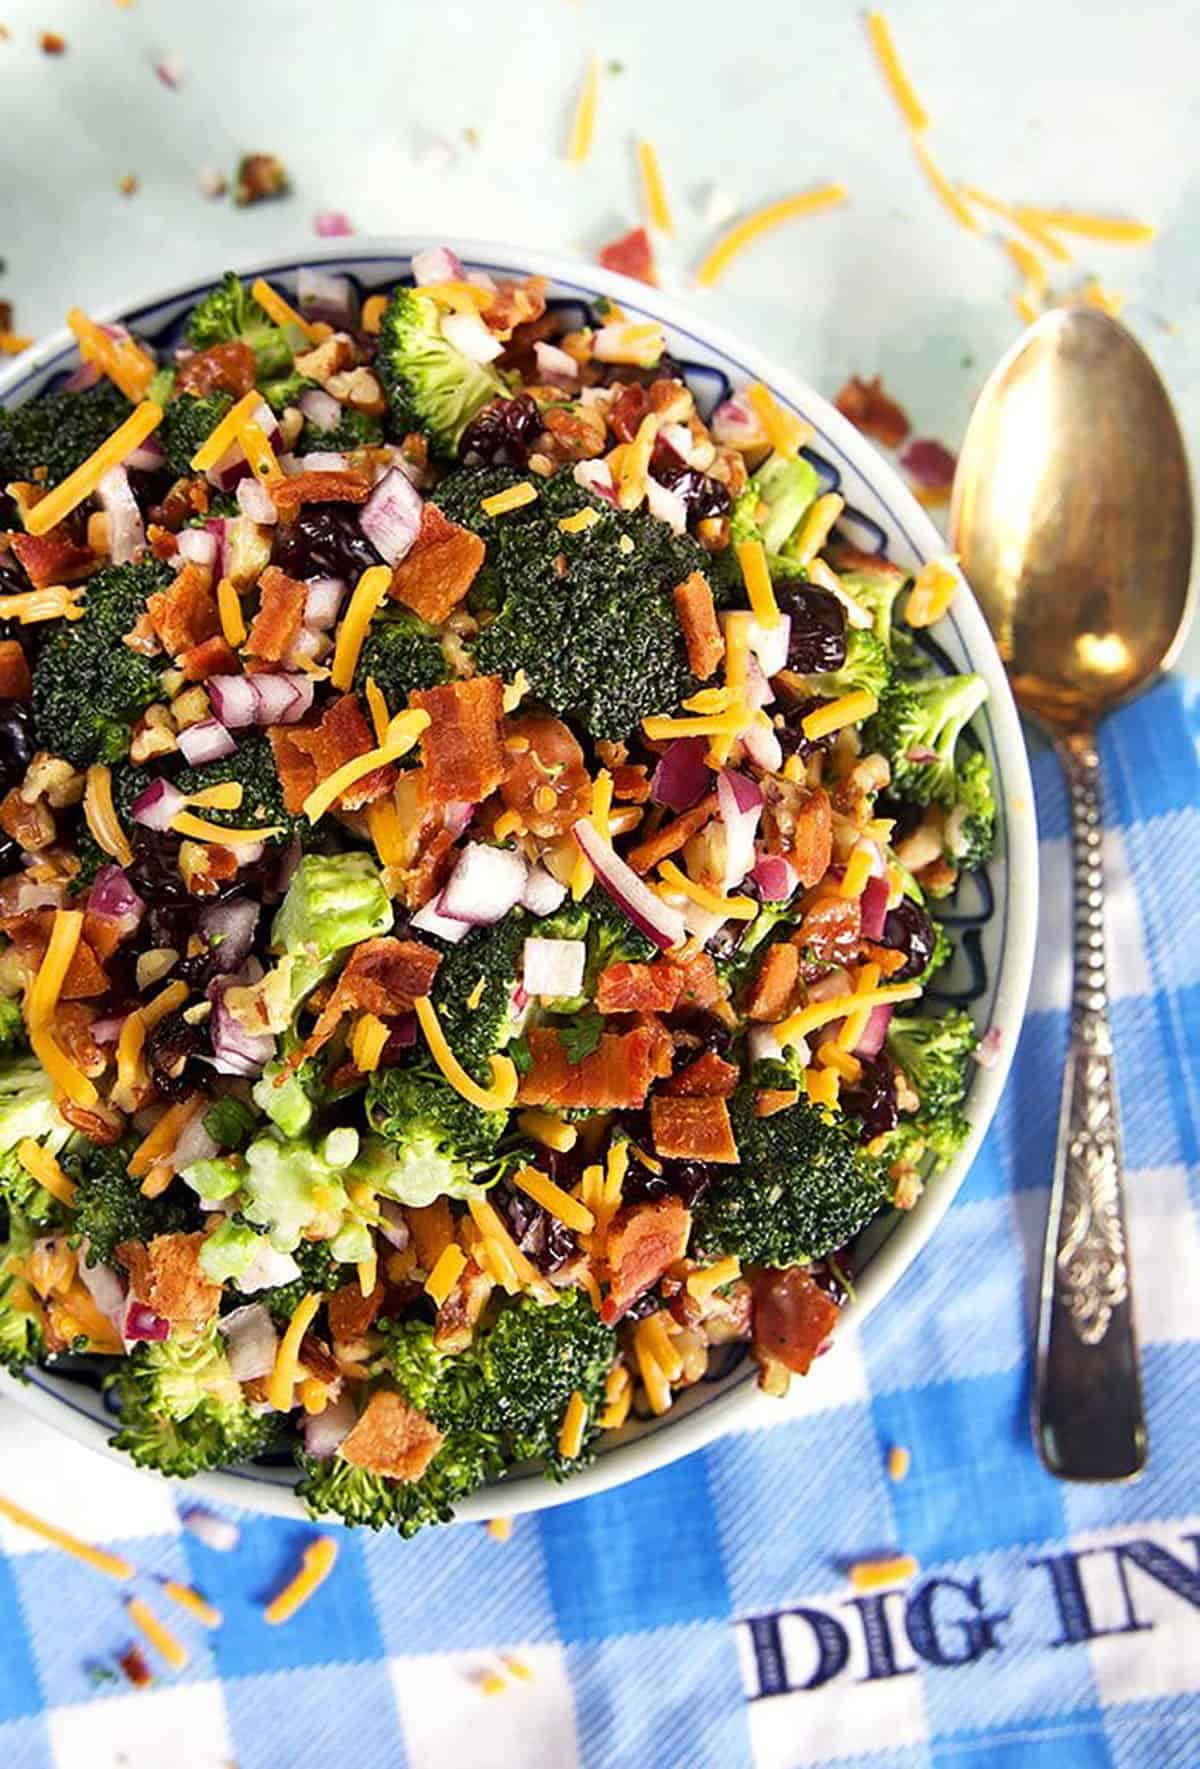 Overhead shot of broccoli salad with bacon on a blue and white checked napkin that says Dig In.